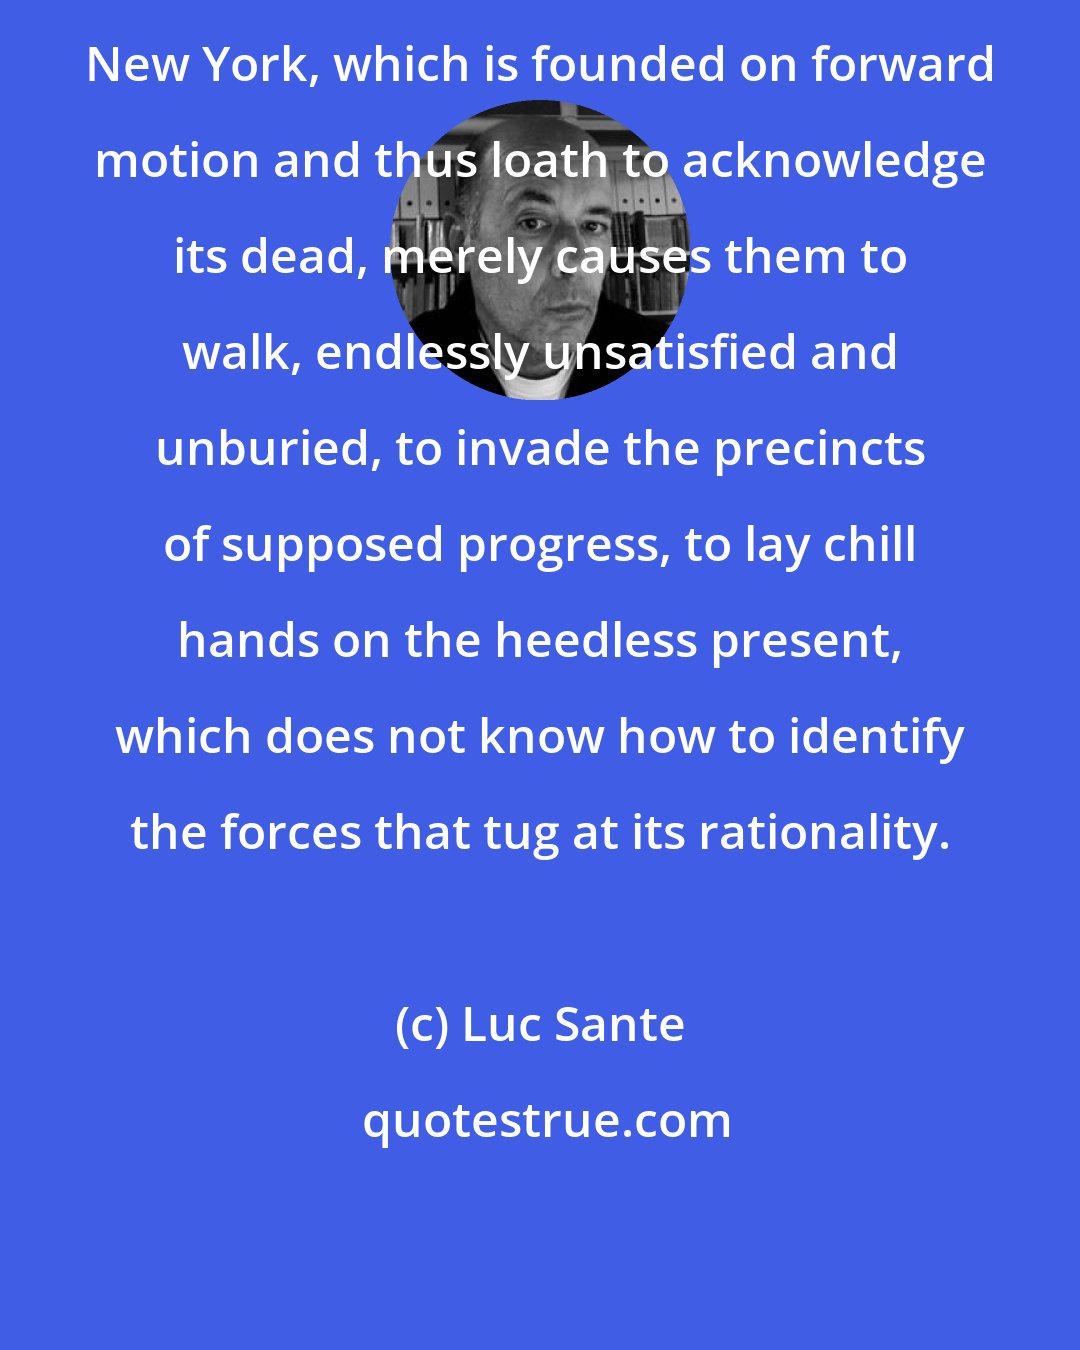 Luc Sante: New York, which is founded on forward motion and thus loath to acknowledge its dead, merely causes them to walk, endlessly unsatisfied and unburied, to invade the precincts of supposed progress, to lay chill hands on the heedless present, which does not know how to identify the forces that tug at its rationality.